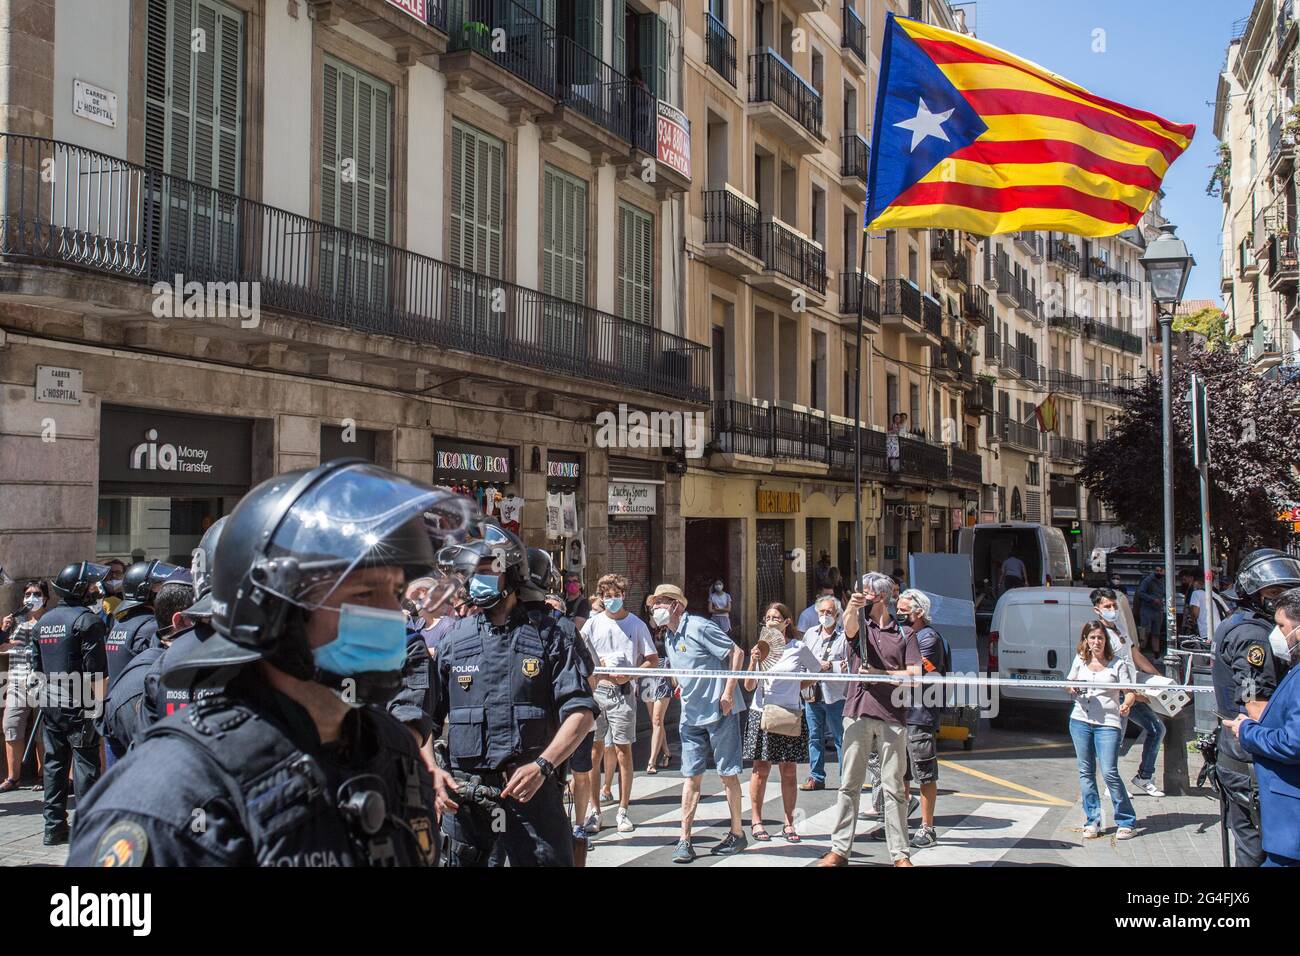 June 21, 2021, Barcelona, Catalonia, Spain: Protester is seen with the Catalan independence flag behind the police.Hundreds of Catalan independentistas have demonstrated this Monday, June 21, in Las Ramblas in Barcelona, in front of the Gran Teatre del Liceu (Great Theater of the Lyceum), shielded by many policemen, to protest the visit of the President of the Spanish Government, Pedro Sanchez, who has held a conference entitled ''Reunion: a project for the future for all of Spain'', with the expectation of an imminent granting of pardons for the independence leaders in prison. The protesters Stock Photo